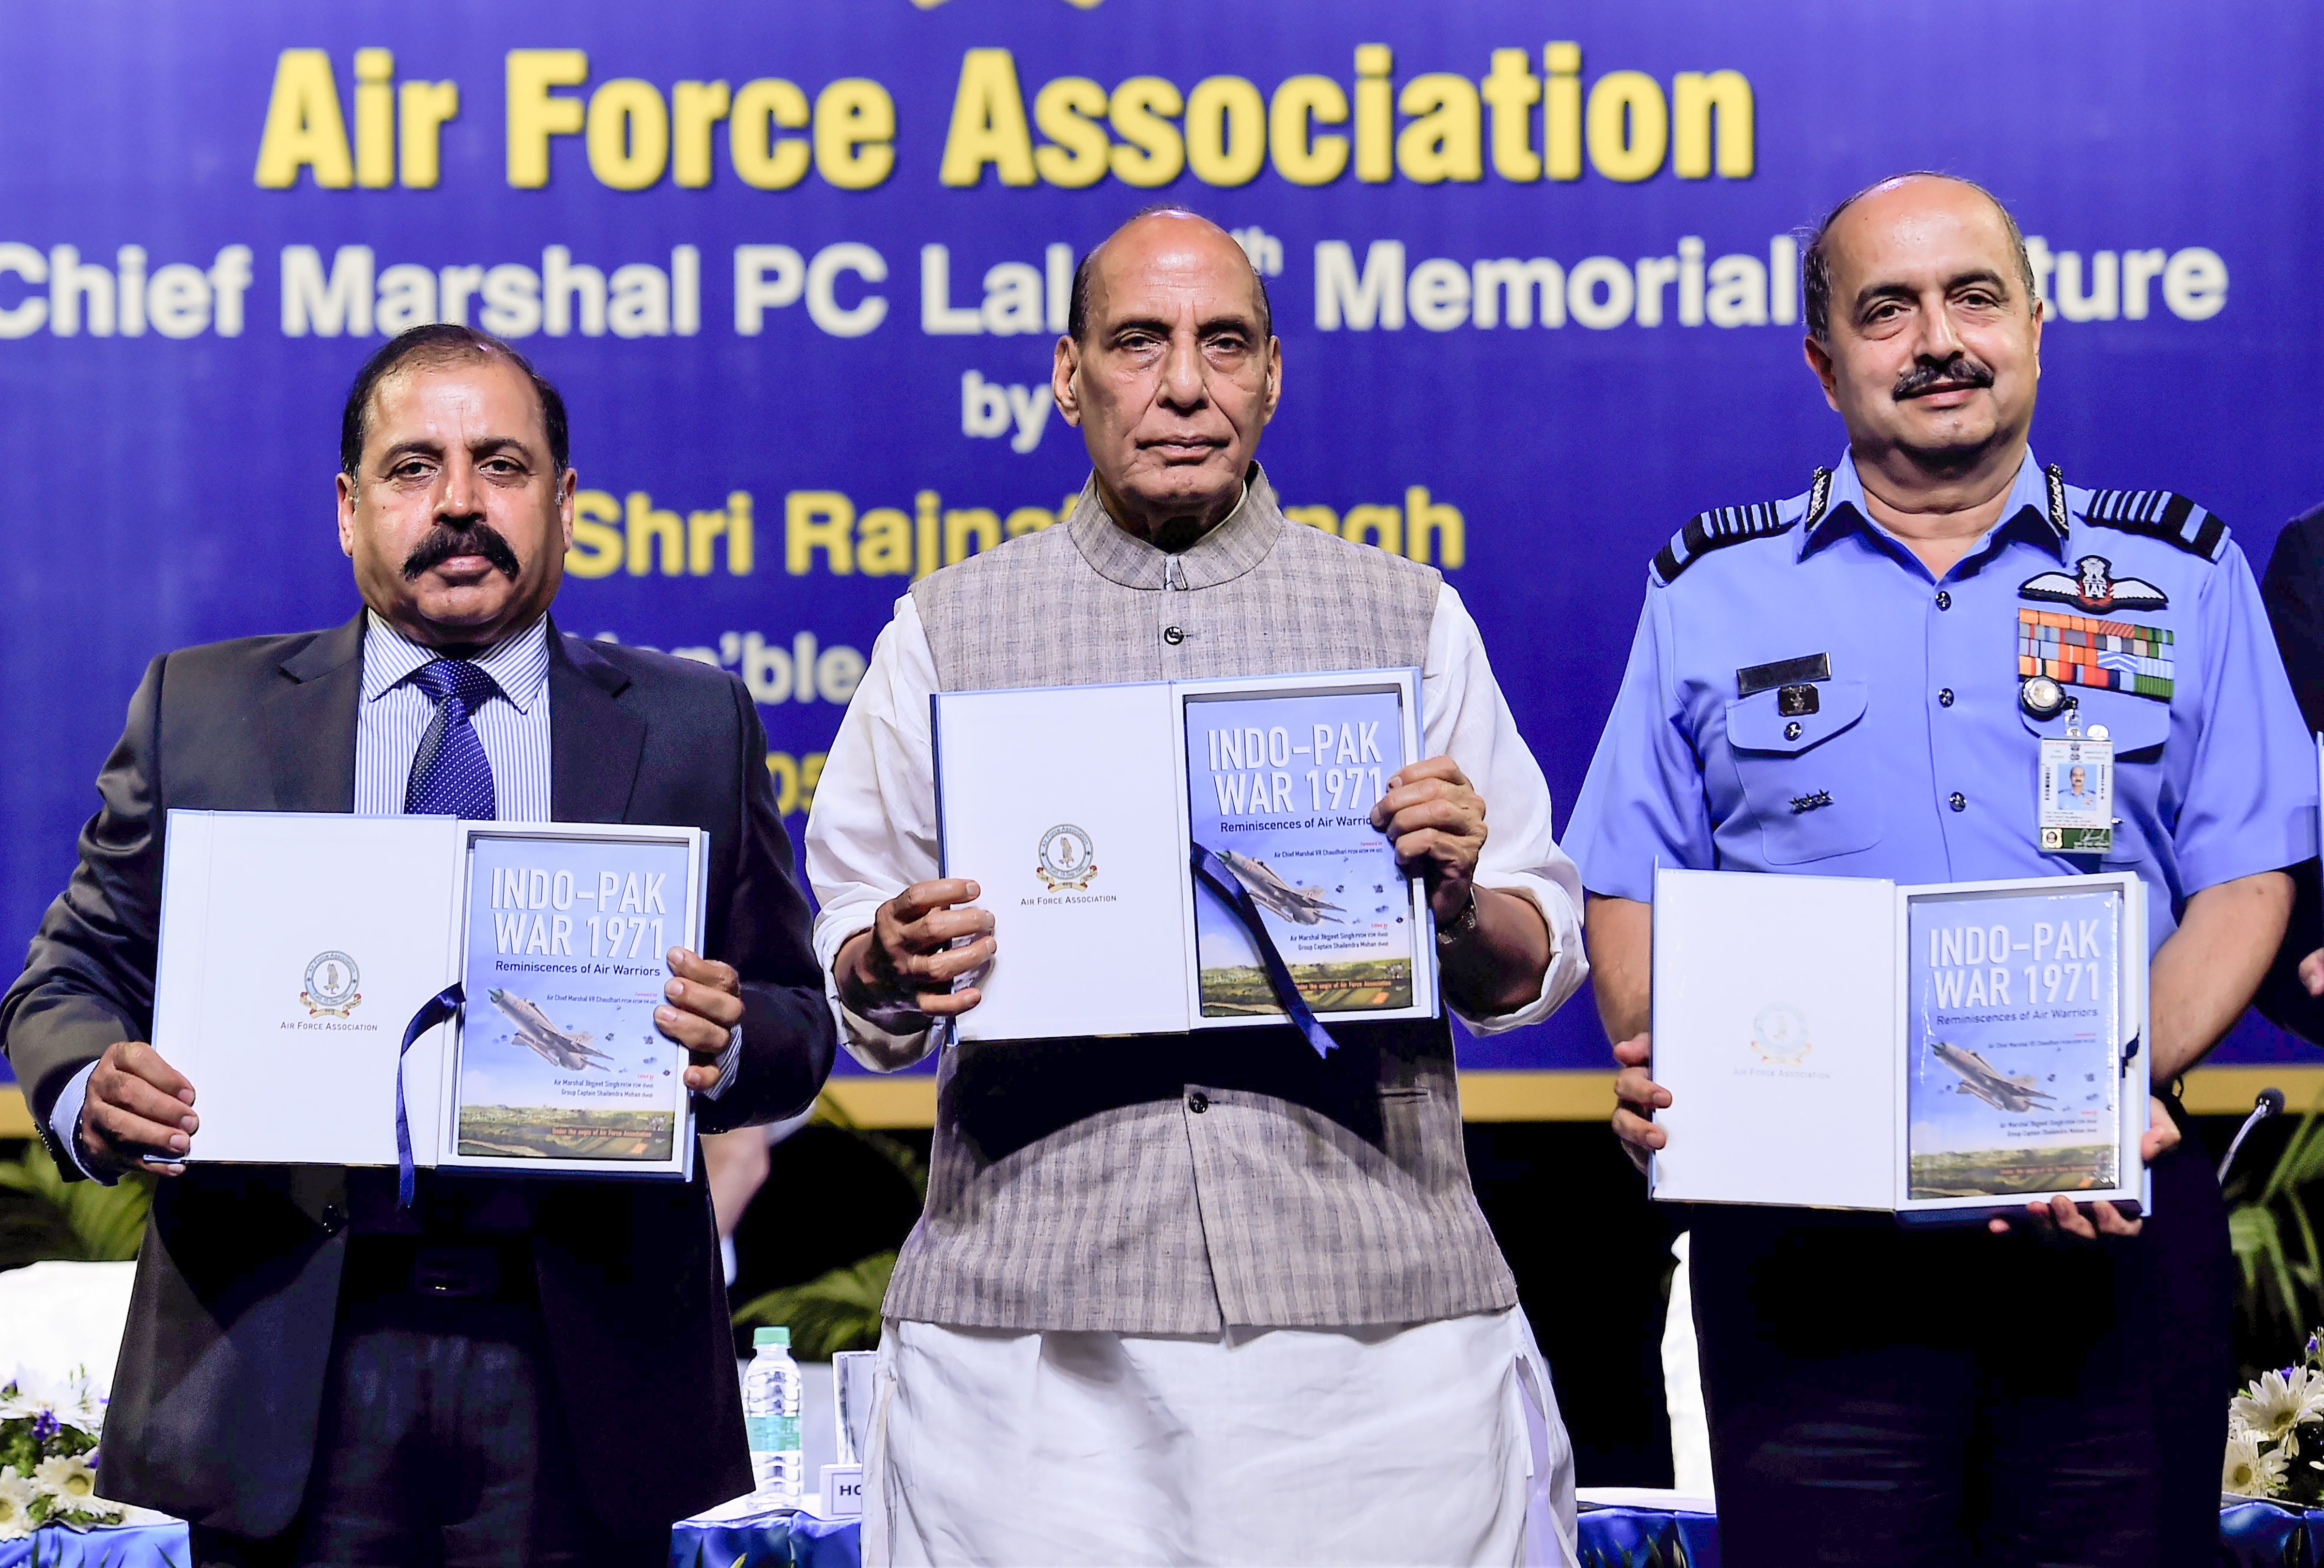 Be prepared for space attacks: Rajnath Singh to Indian Air Force